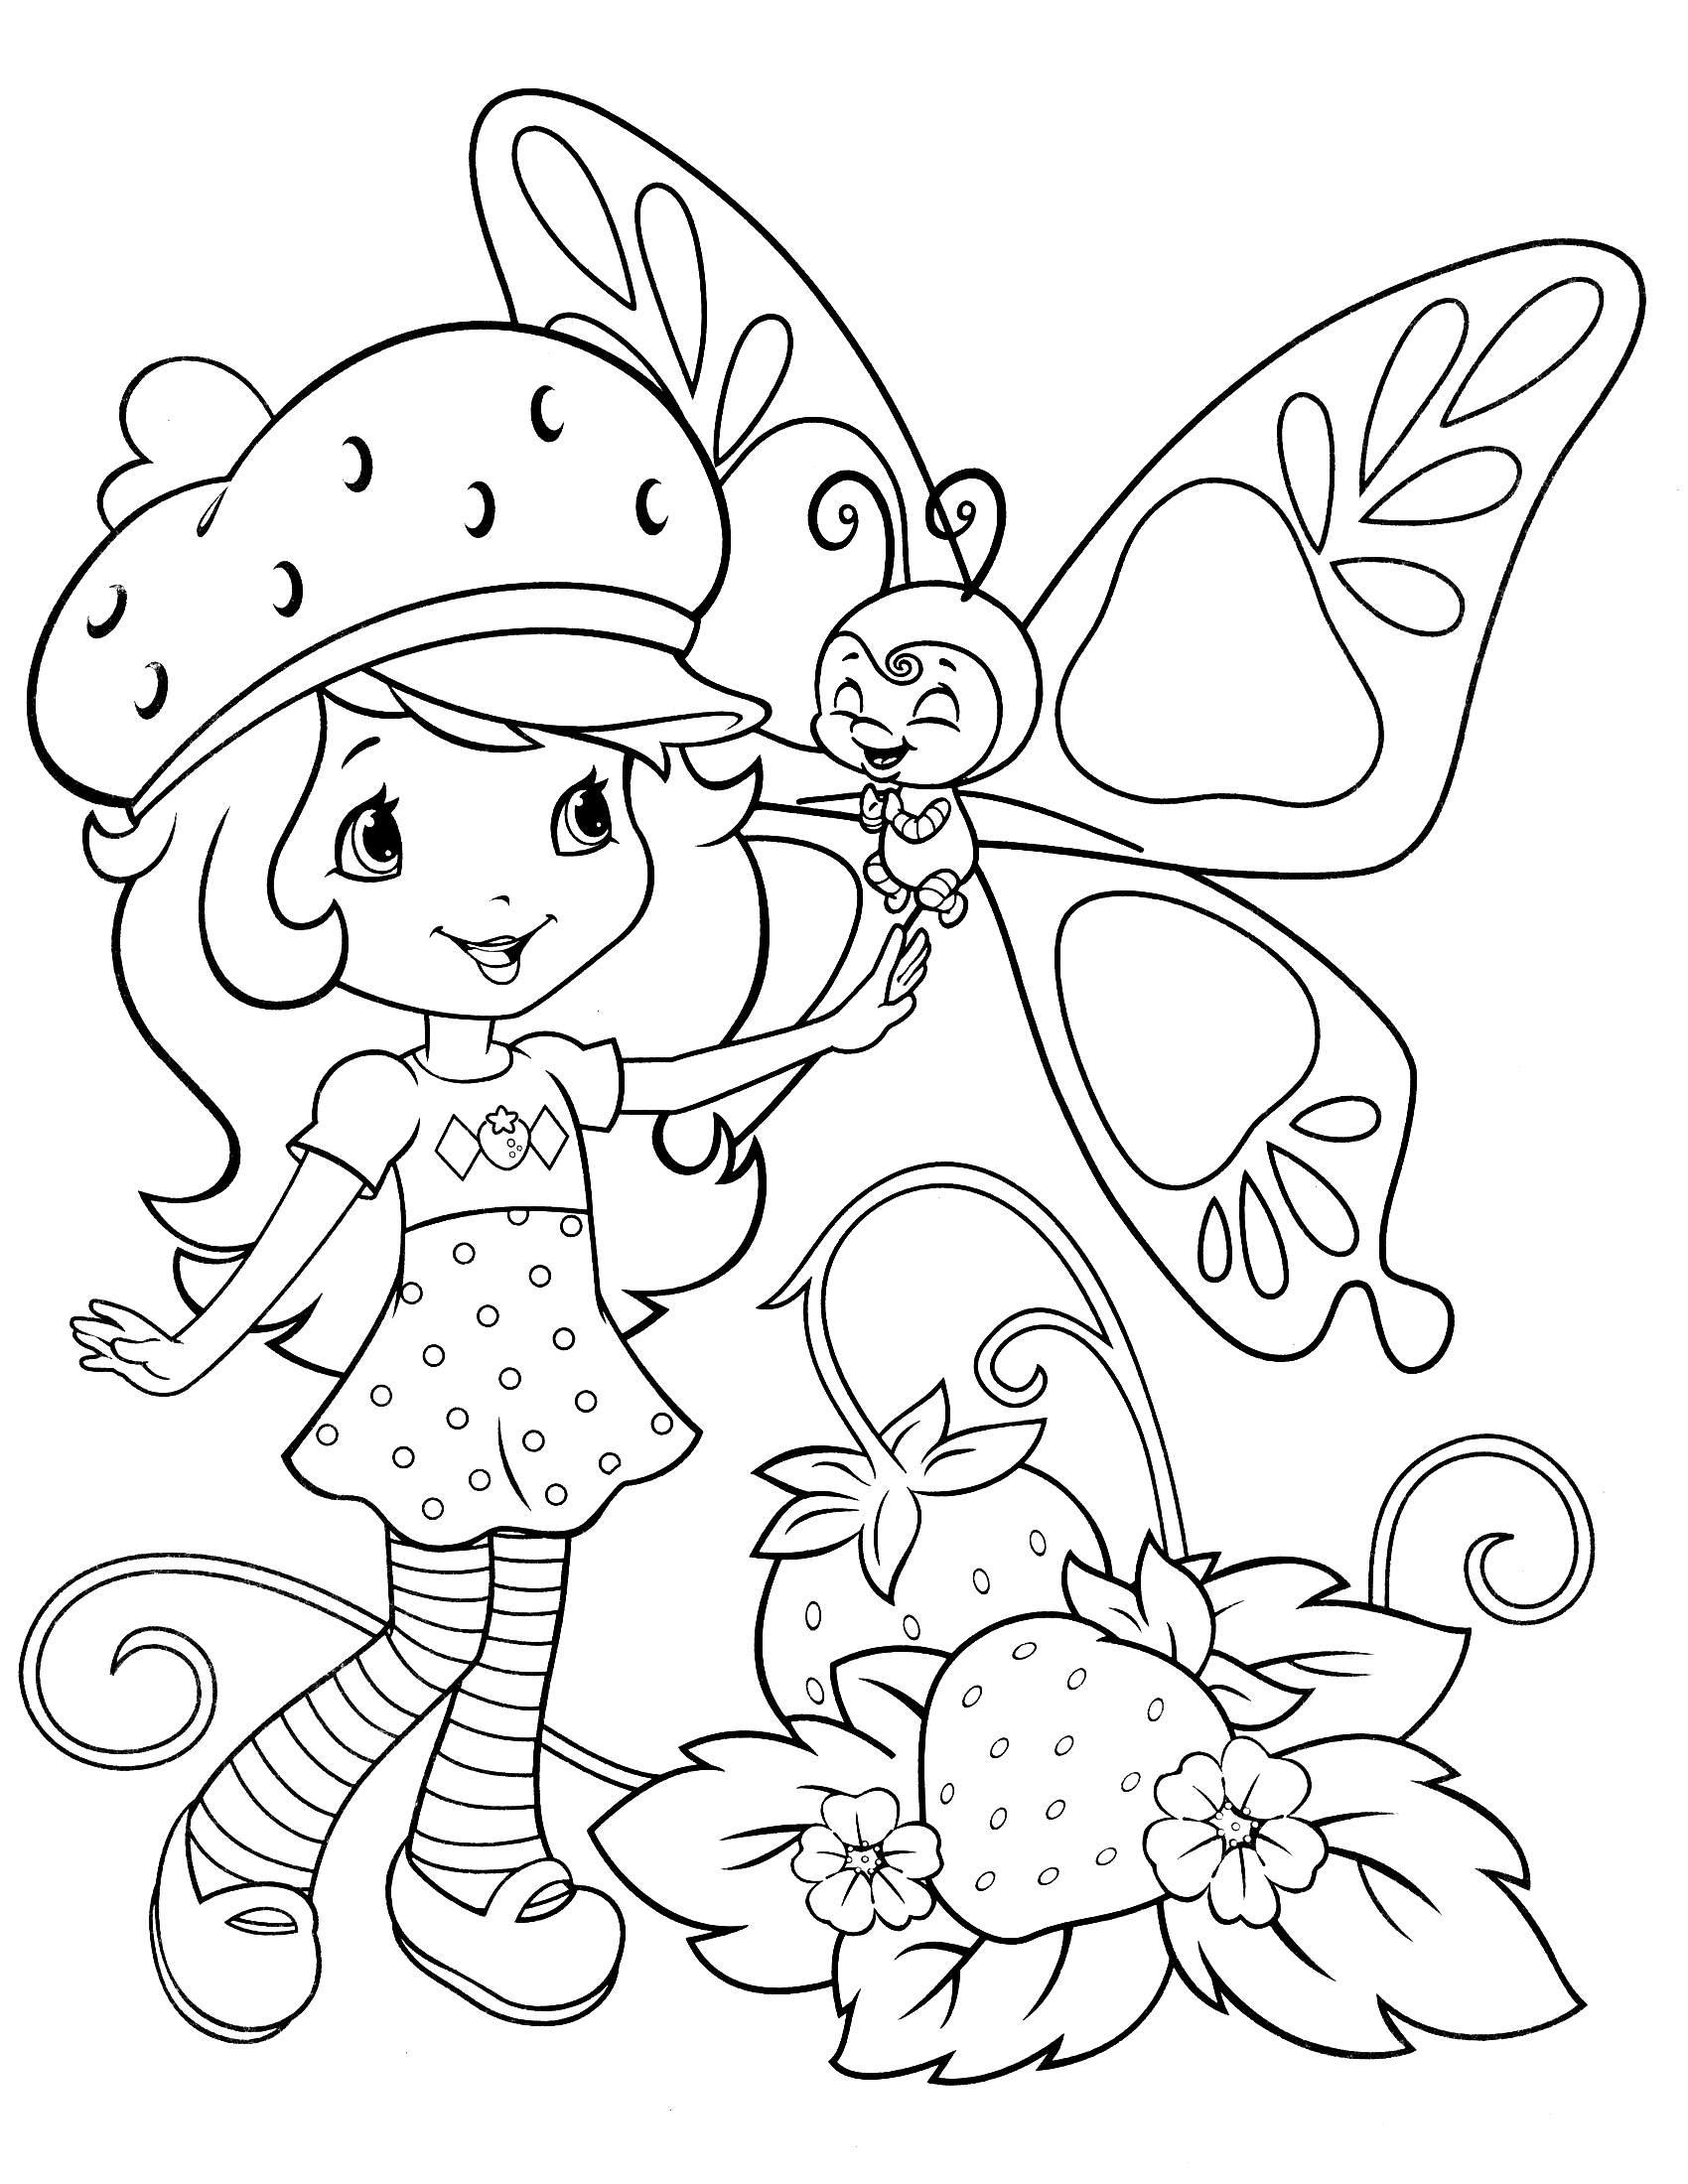 Strawberry Shortcake Printable Coloring Pages Printable World Holiday